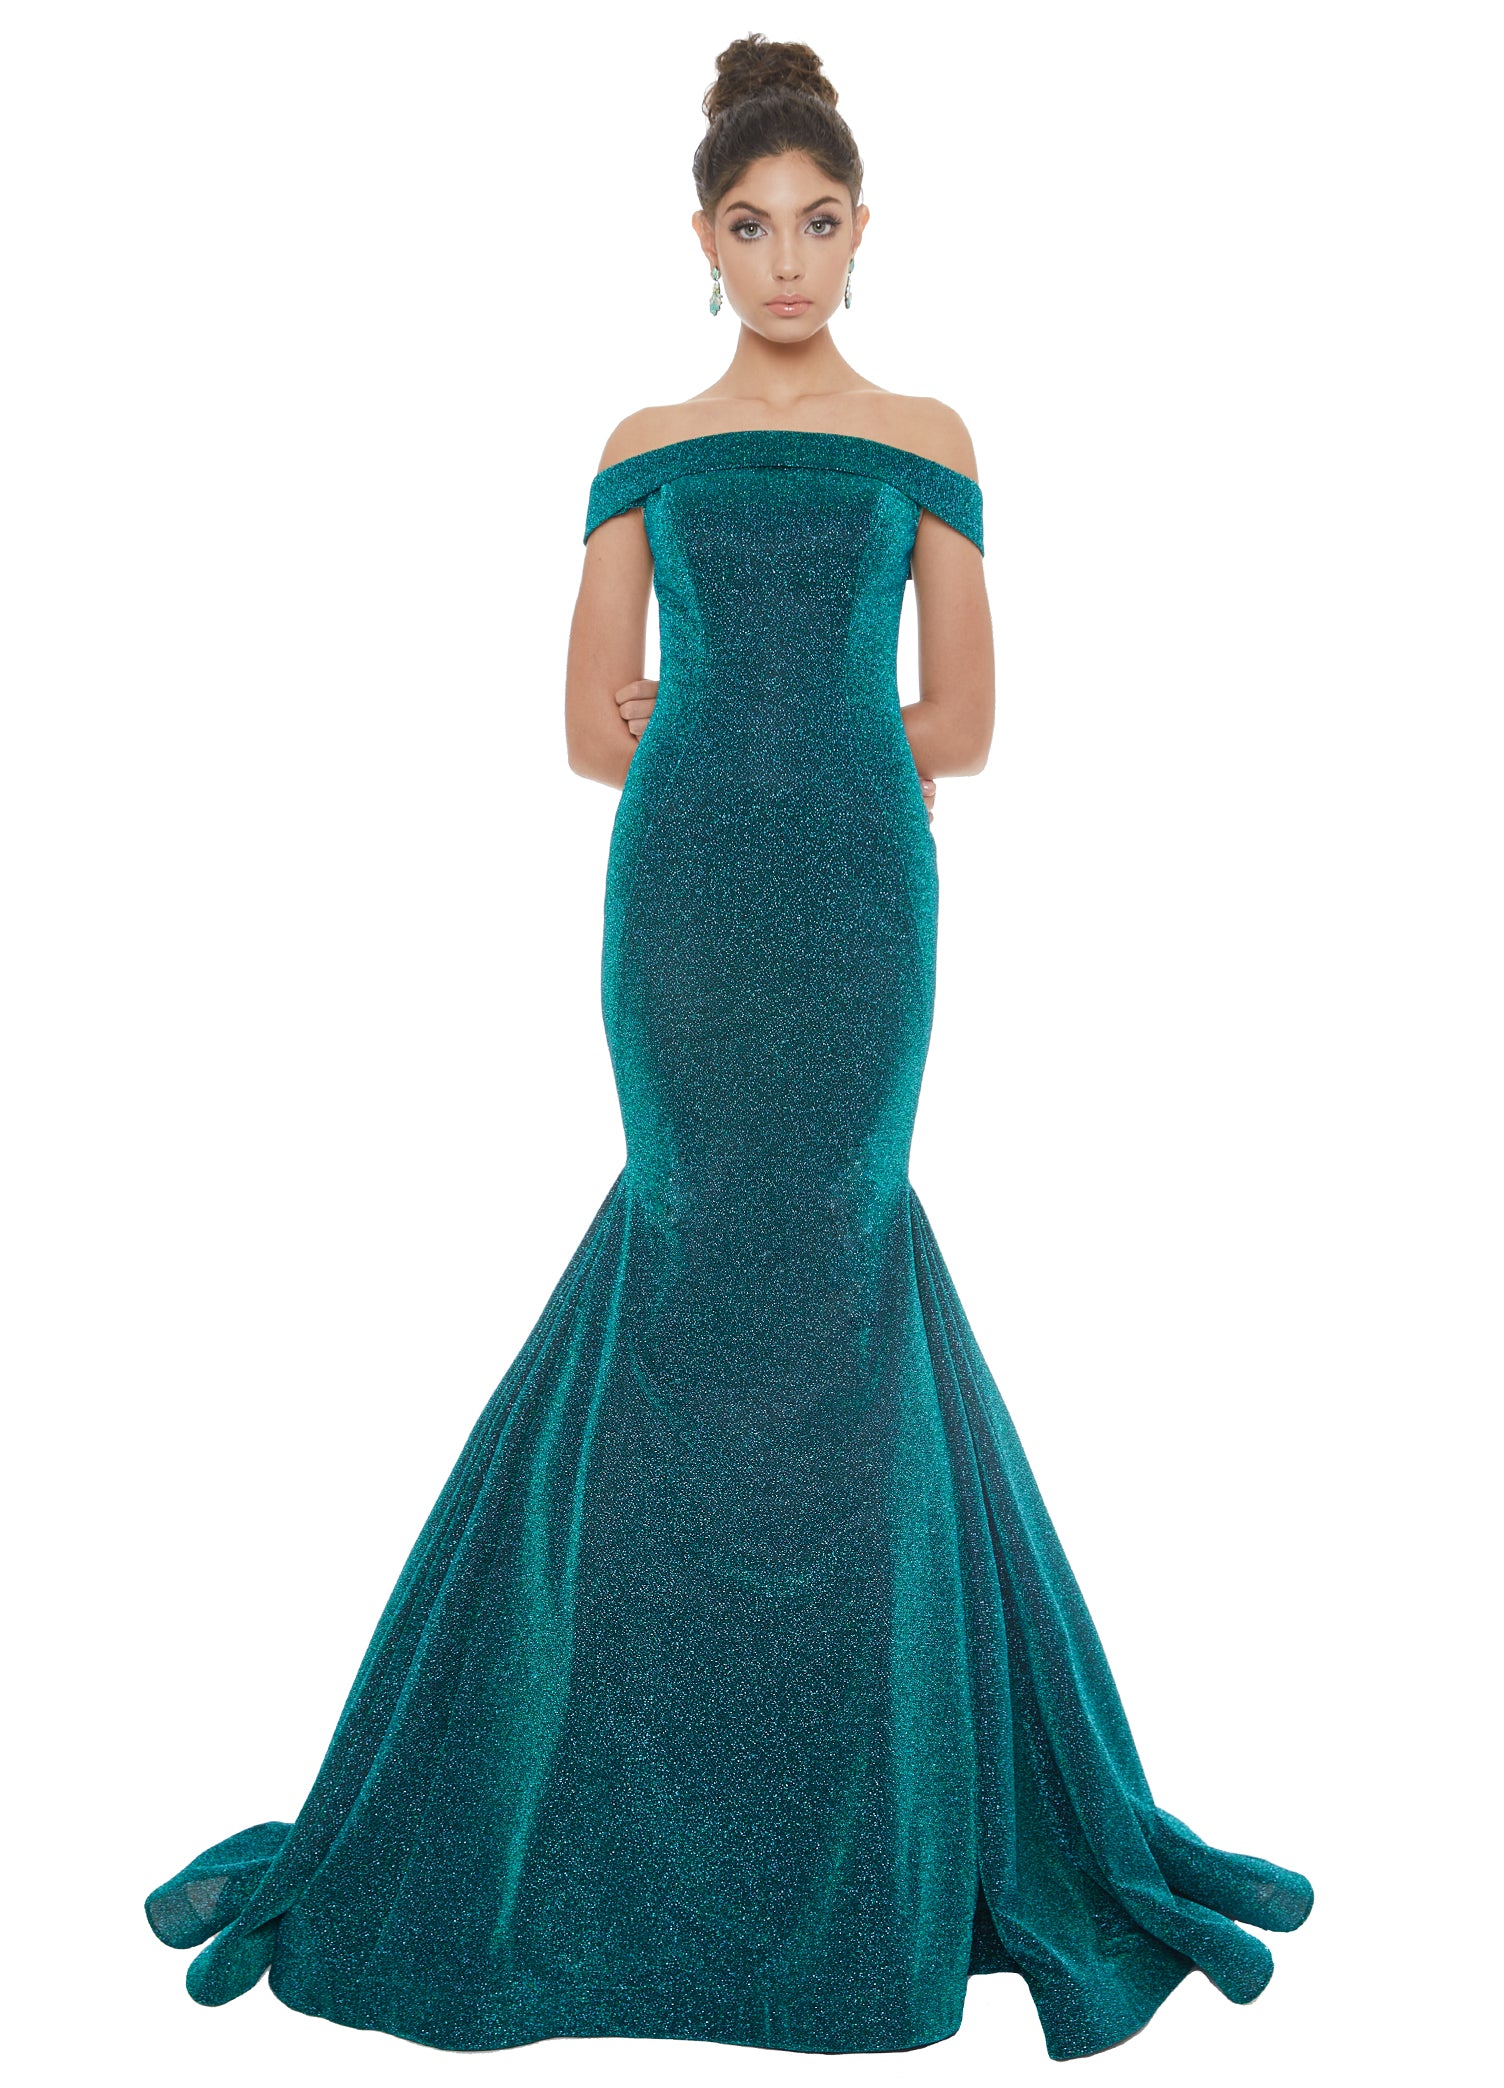 Ashley Lauren 1606 is a long fitted Metallic Shimmer fitted stretch Scuba Prom & Pageant Dress. Featuring an off the shoulder straight neckline This shimmering evening gown has a lush Trumpet skirt with a sweeping train and a horse hair edged hem.